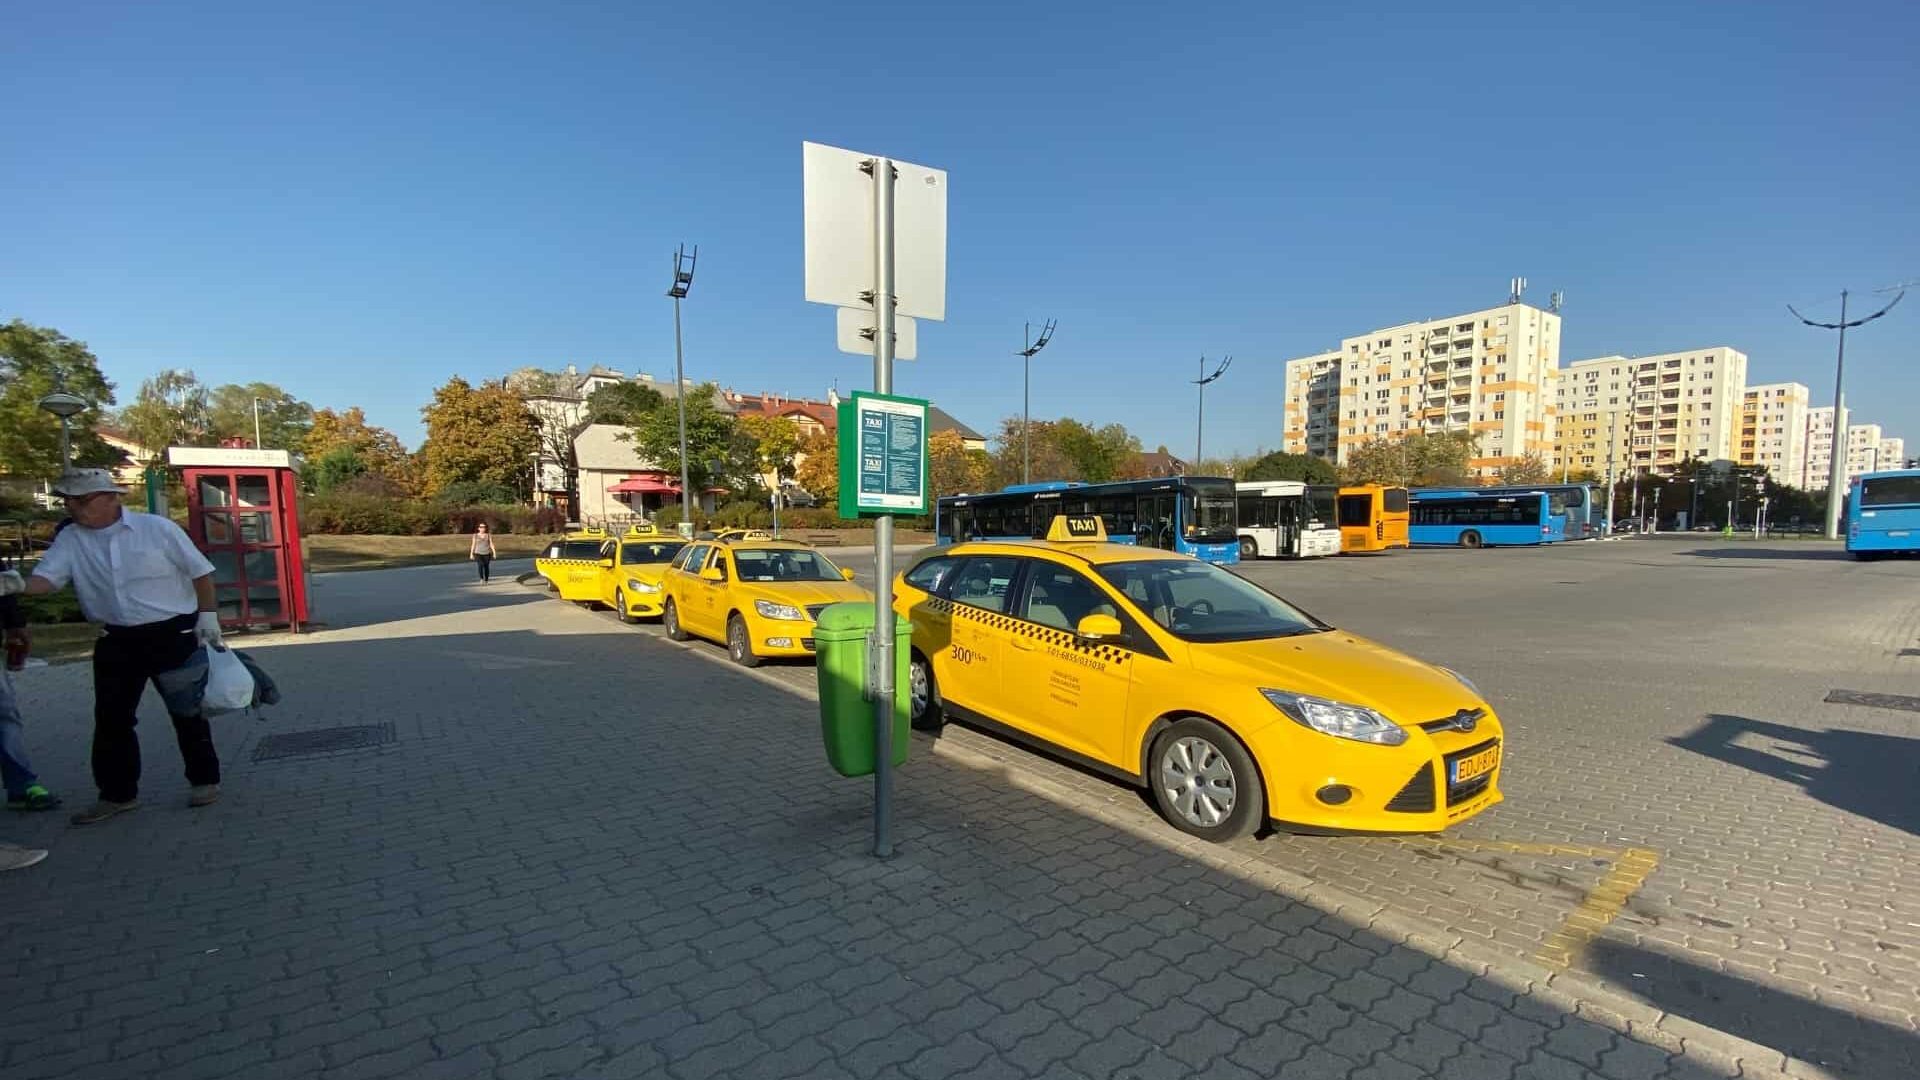 Budapest Airport Taxi